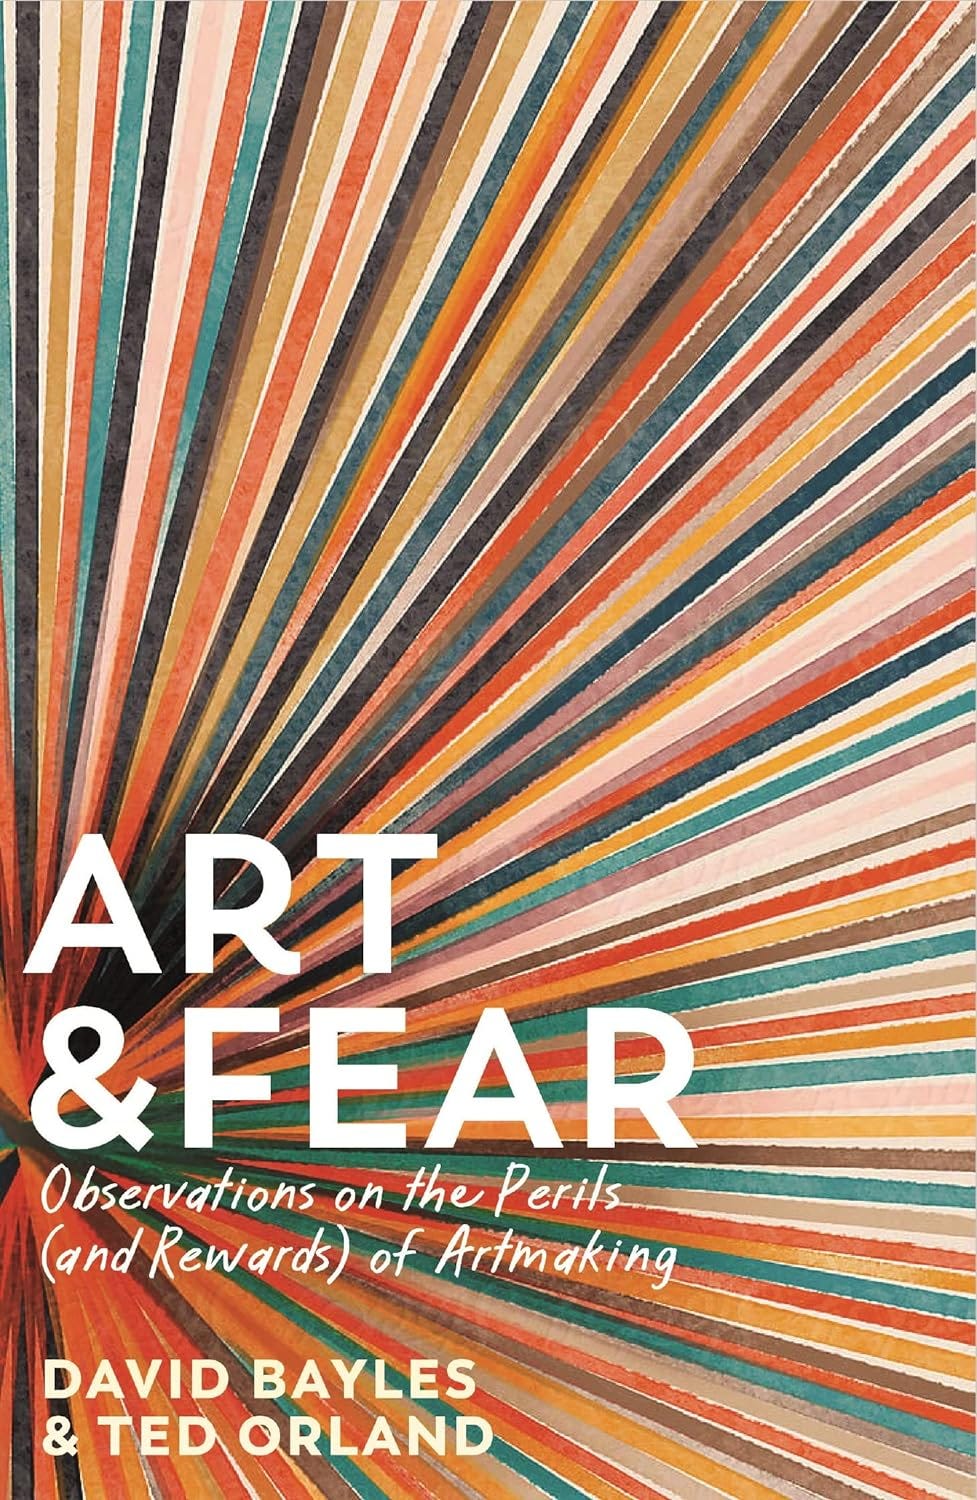 Art & Fear: Observations on the Perils (and rewards)of Artmaking by David Bayles and Ted Orland